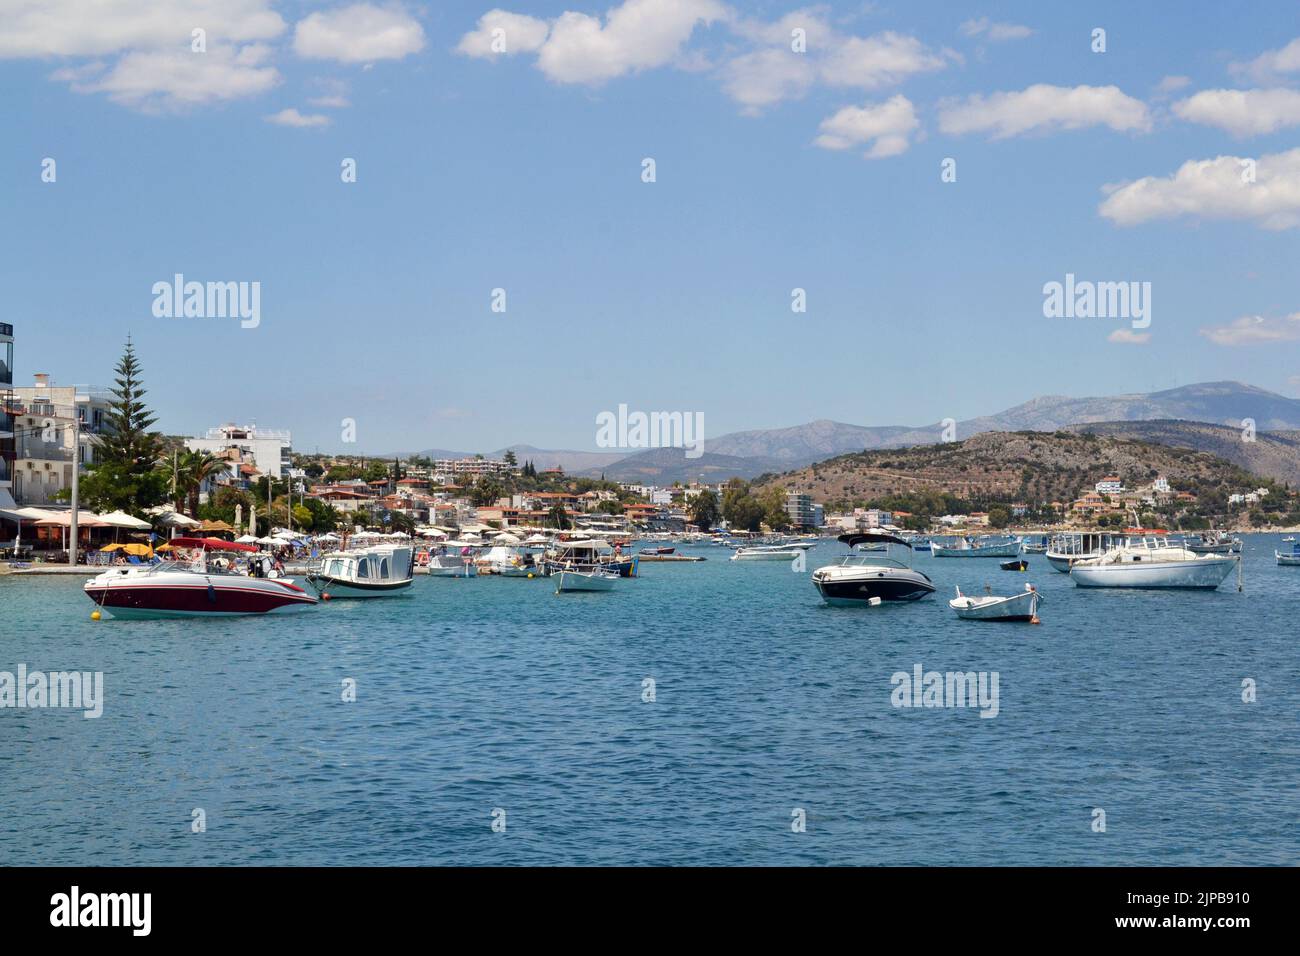 Boats in Tolo, a small village in Greece on the Peloponnese peninsula. Stock Photo